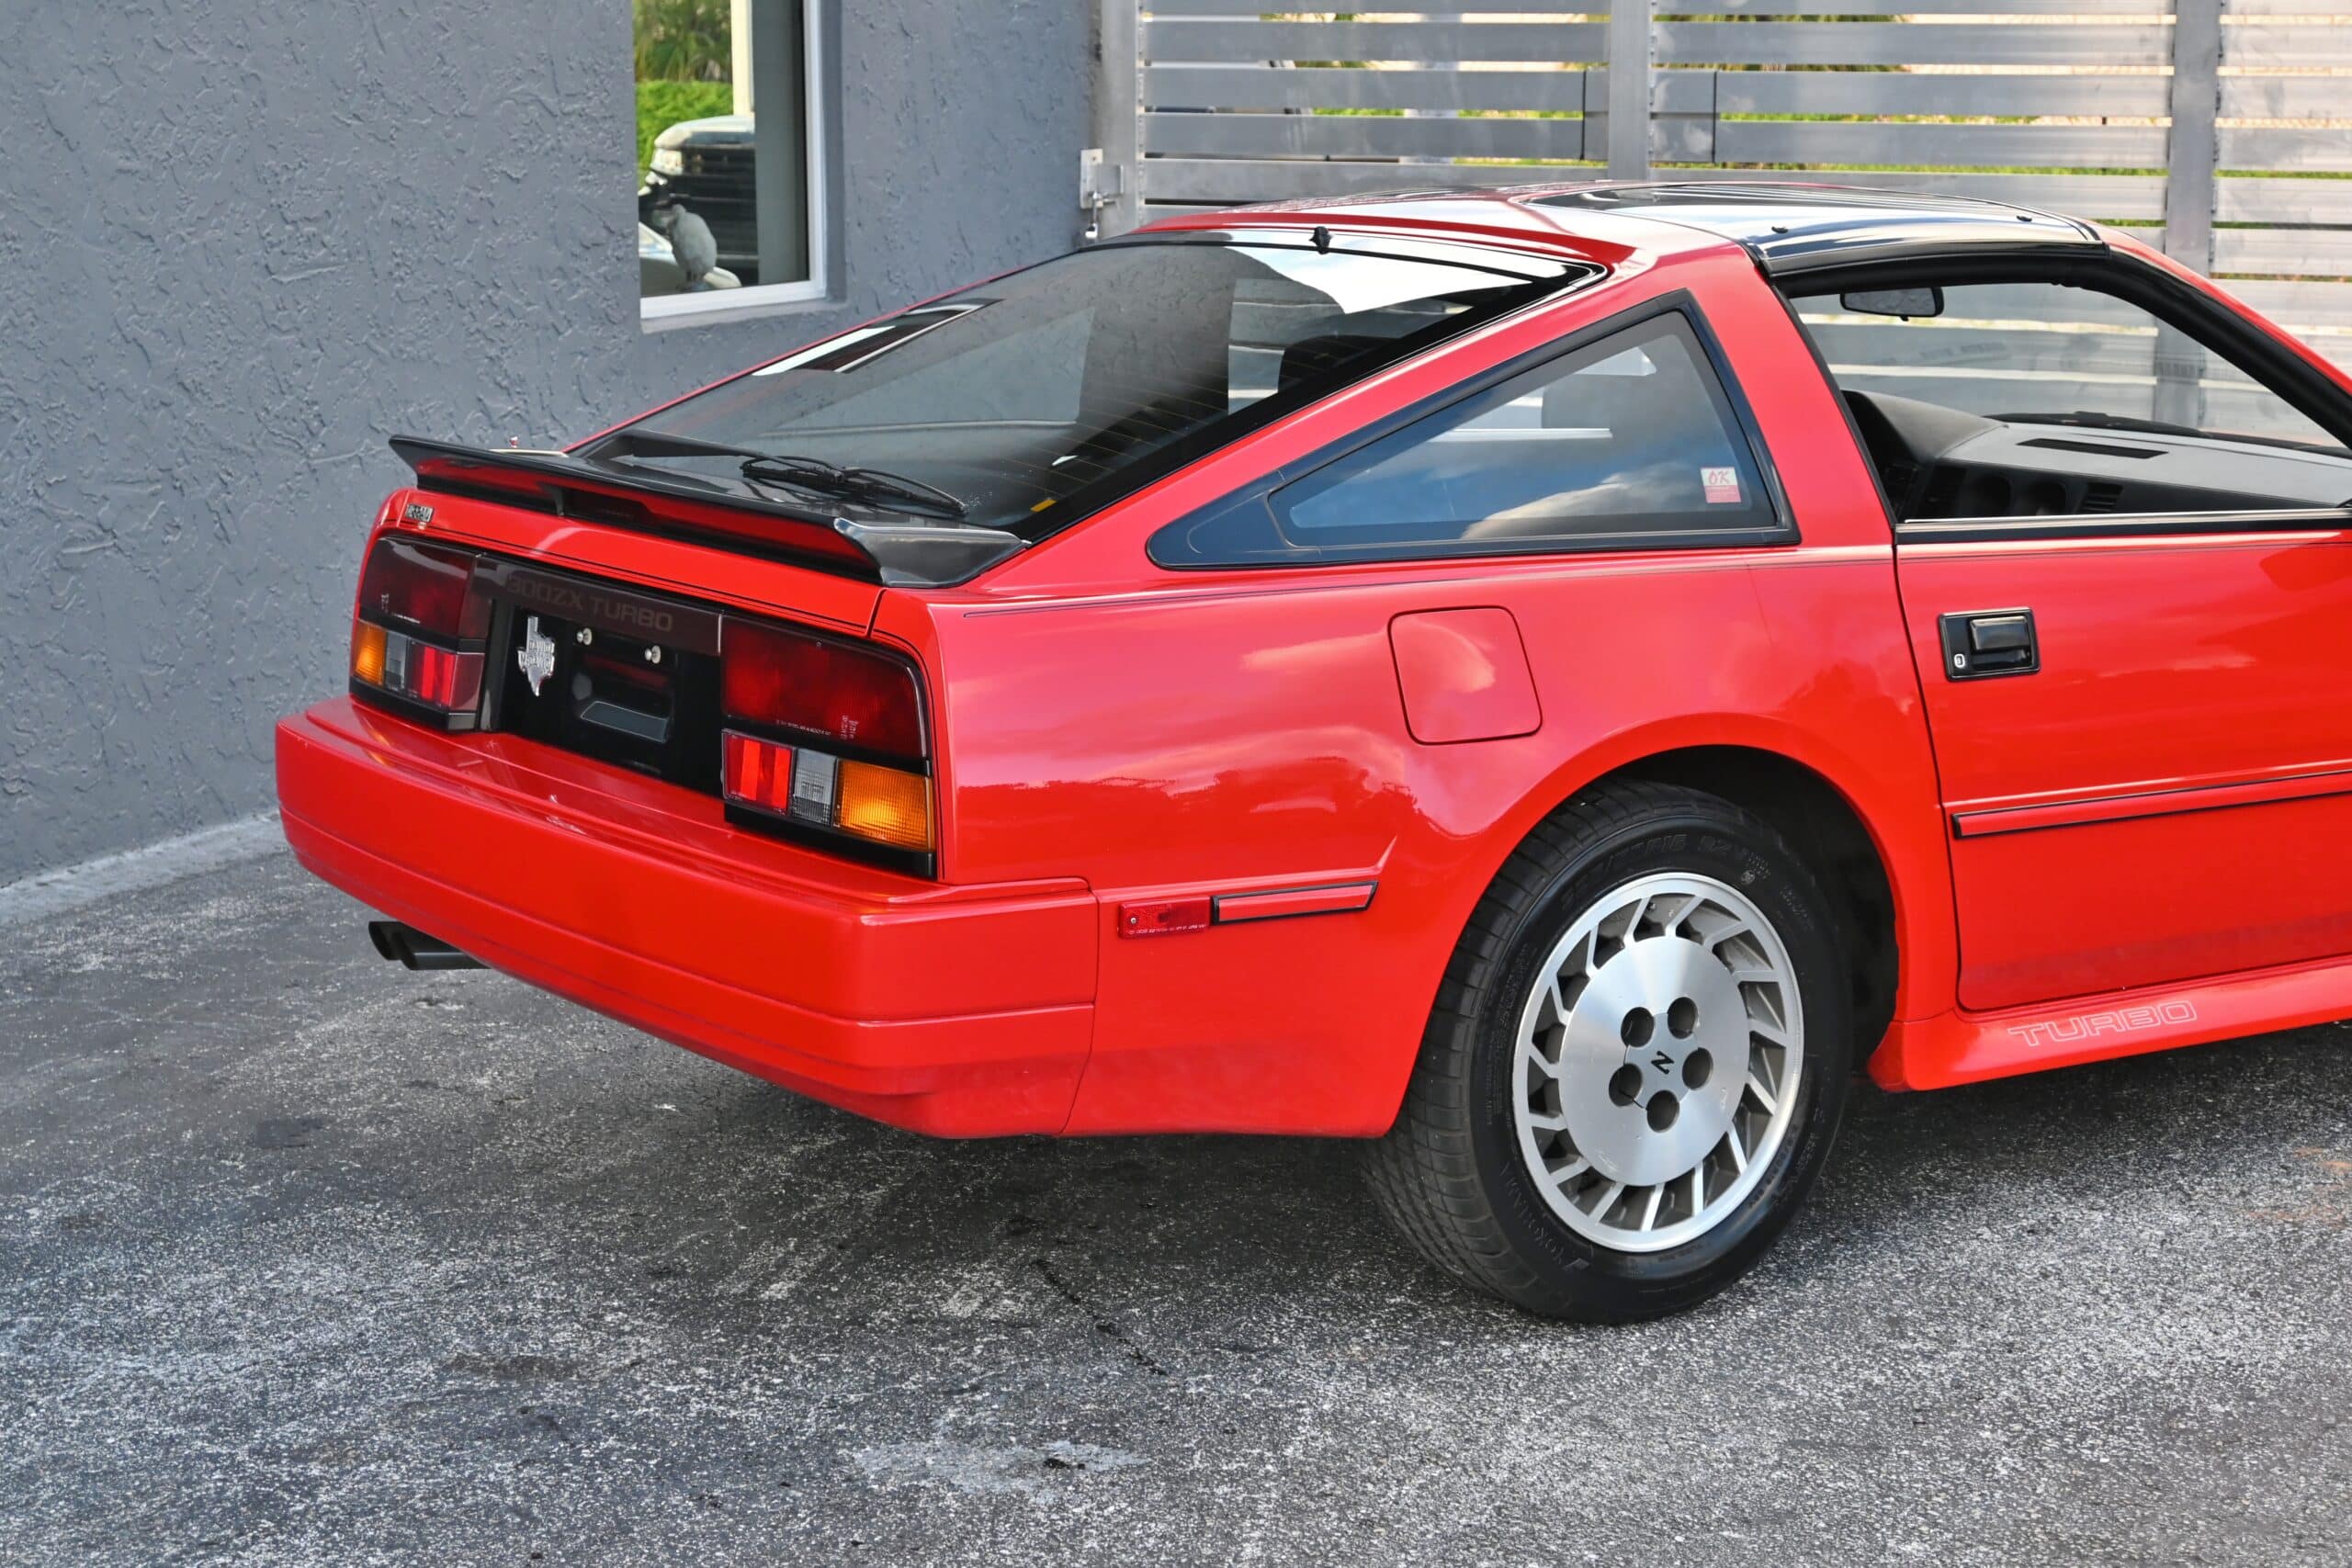 1986 Nissan 300ZX TURBO 2 Owner -ONLY 21K ORIGINAL MILES-Original Paint- 5 Speed Manual-Timing belt done